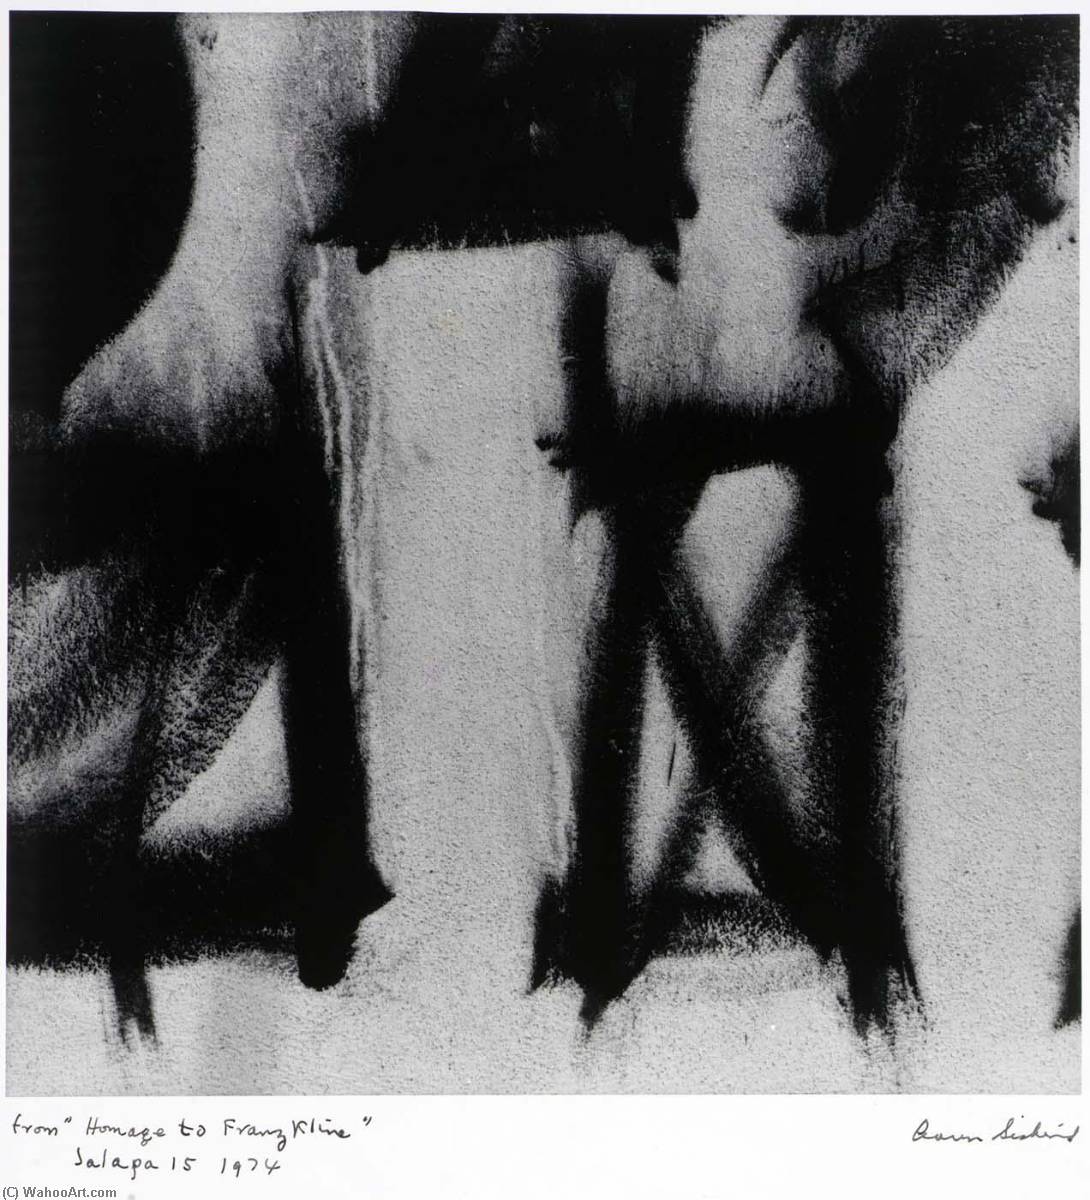 Buy Museum Art Reproductions Jalapa 15 1974, from the series Homage to Franz Kline, 1974 by Aaron Siskind (Inspired By) (1903-1991, United States) | ArtsDot.com